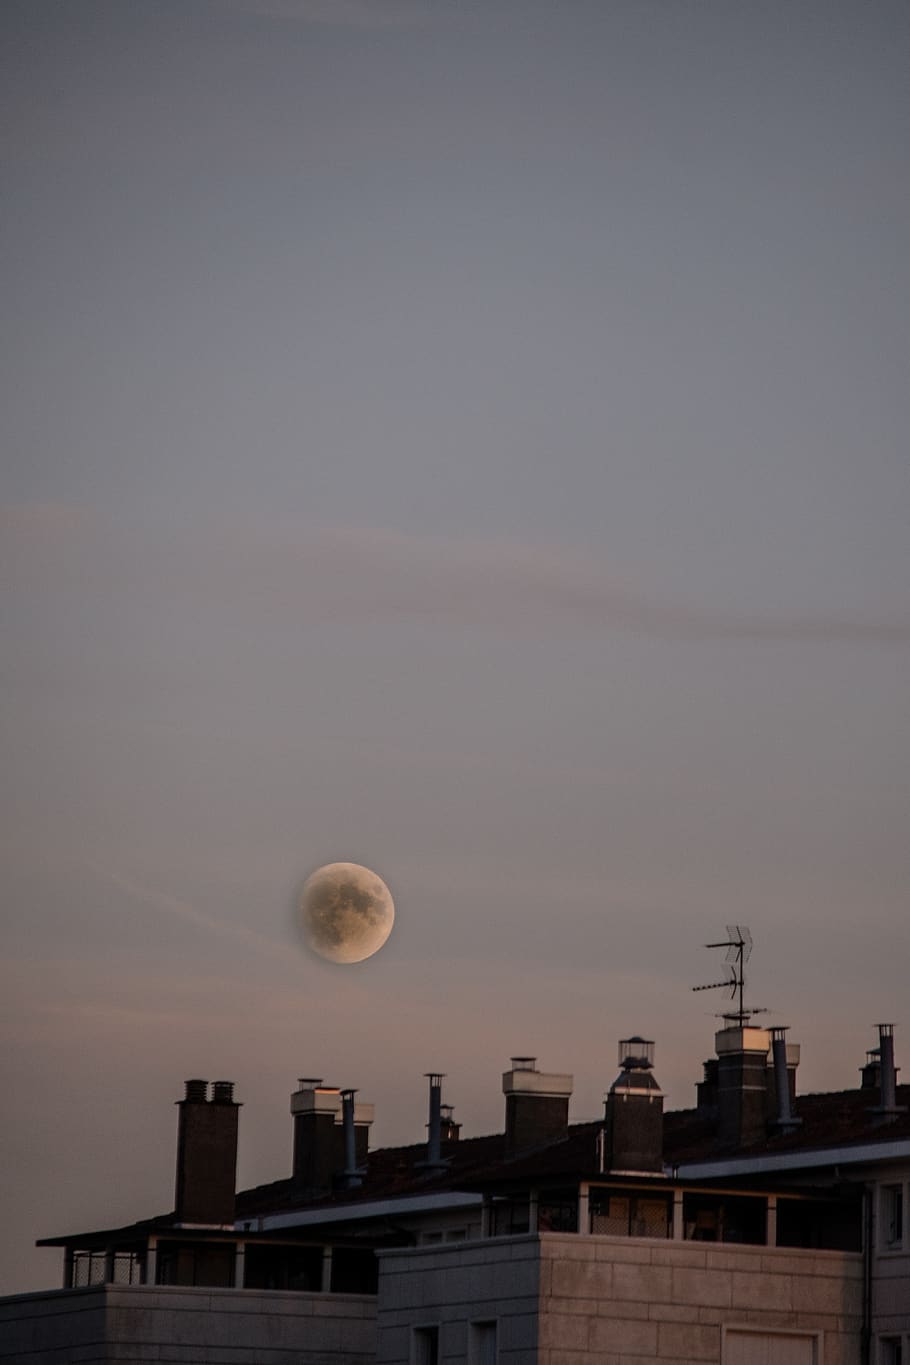 moon, urbex, roof, heritage, housing, house, roofing, building, old, former